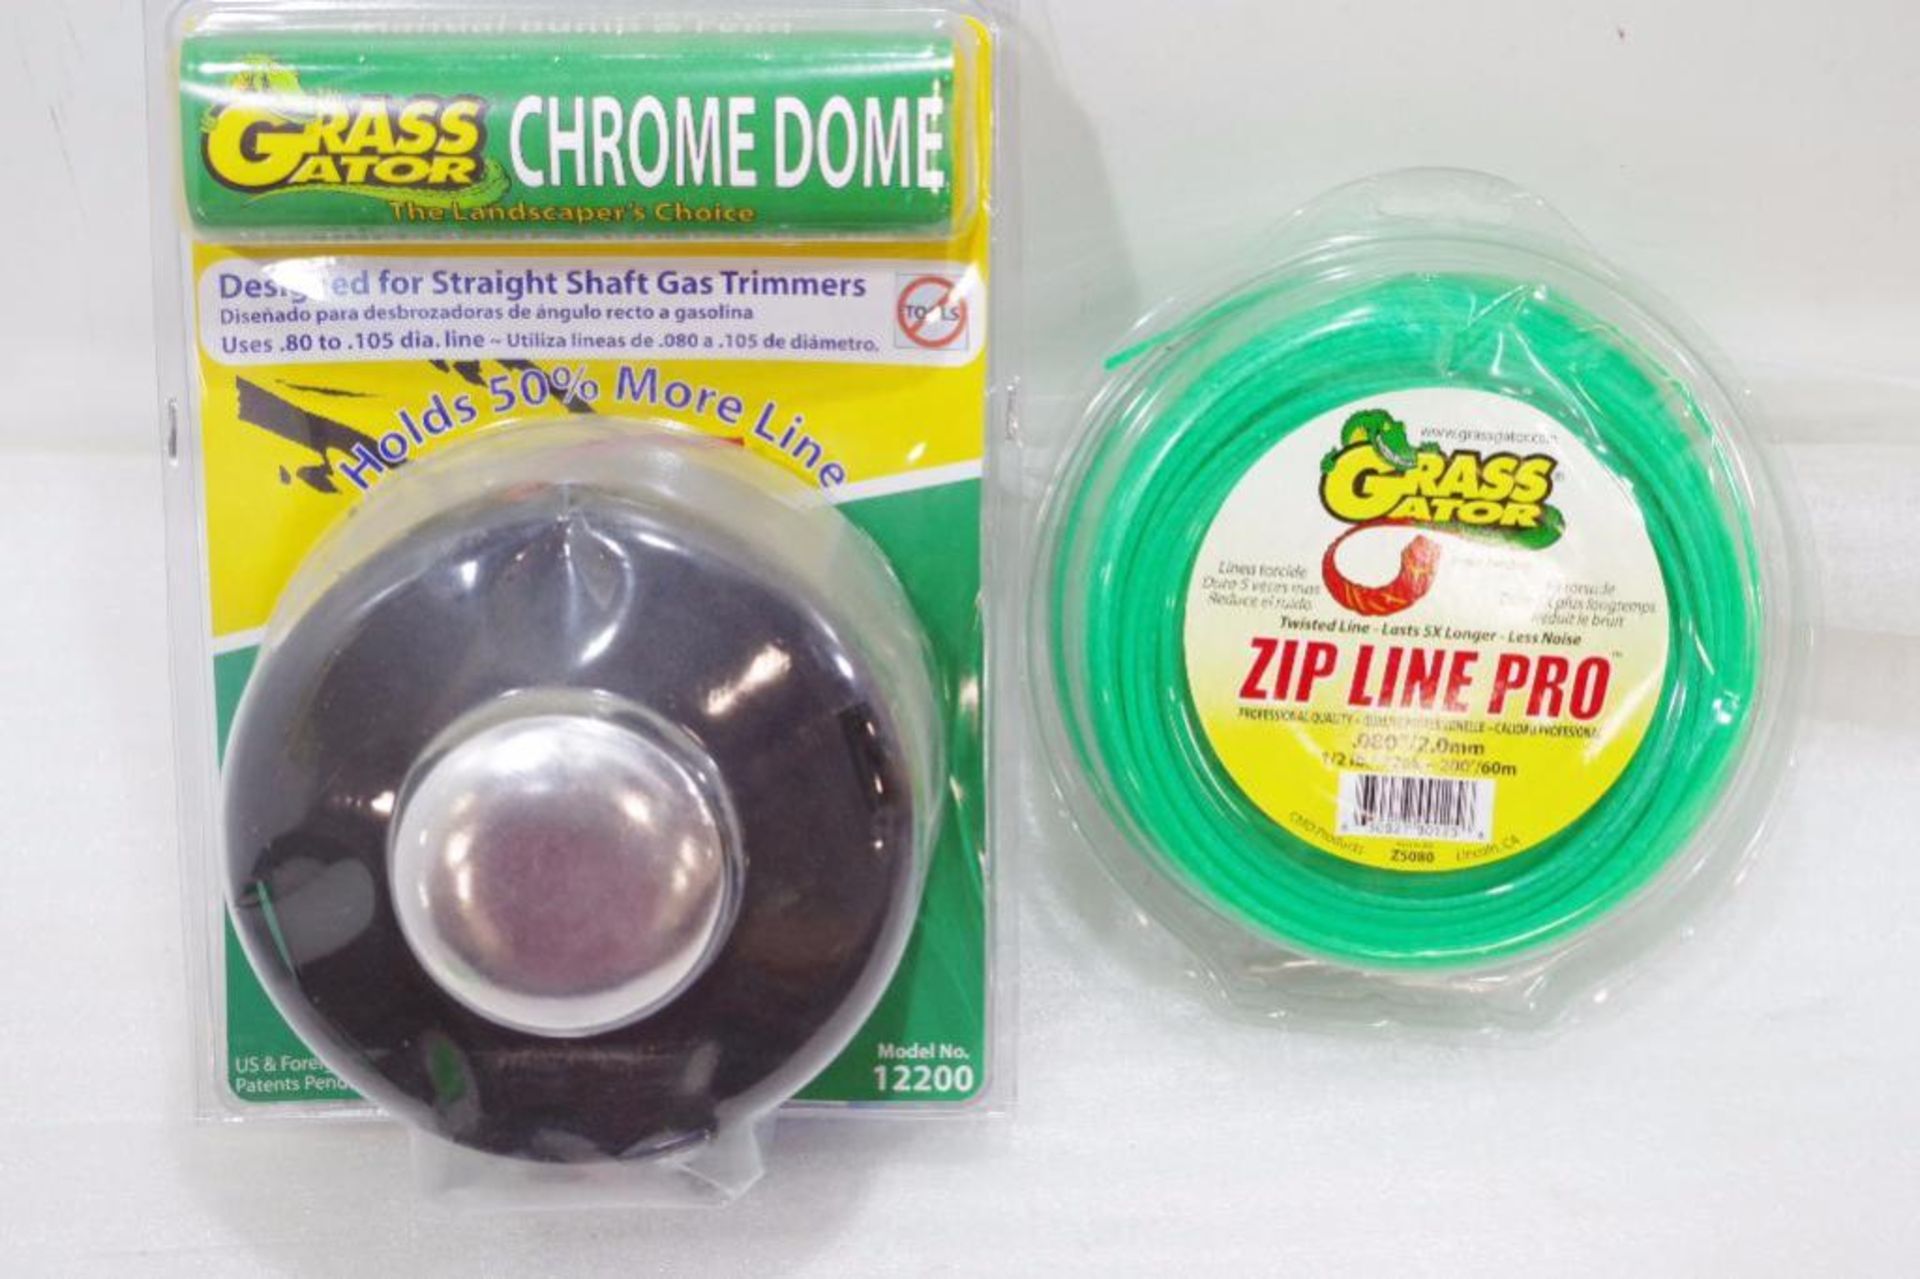 NEW GRASS GATOR Chrome Dome Replacement Trimmer Head and 200' Coil .080" Zip Line Pro - Image 5 of 5